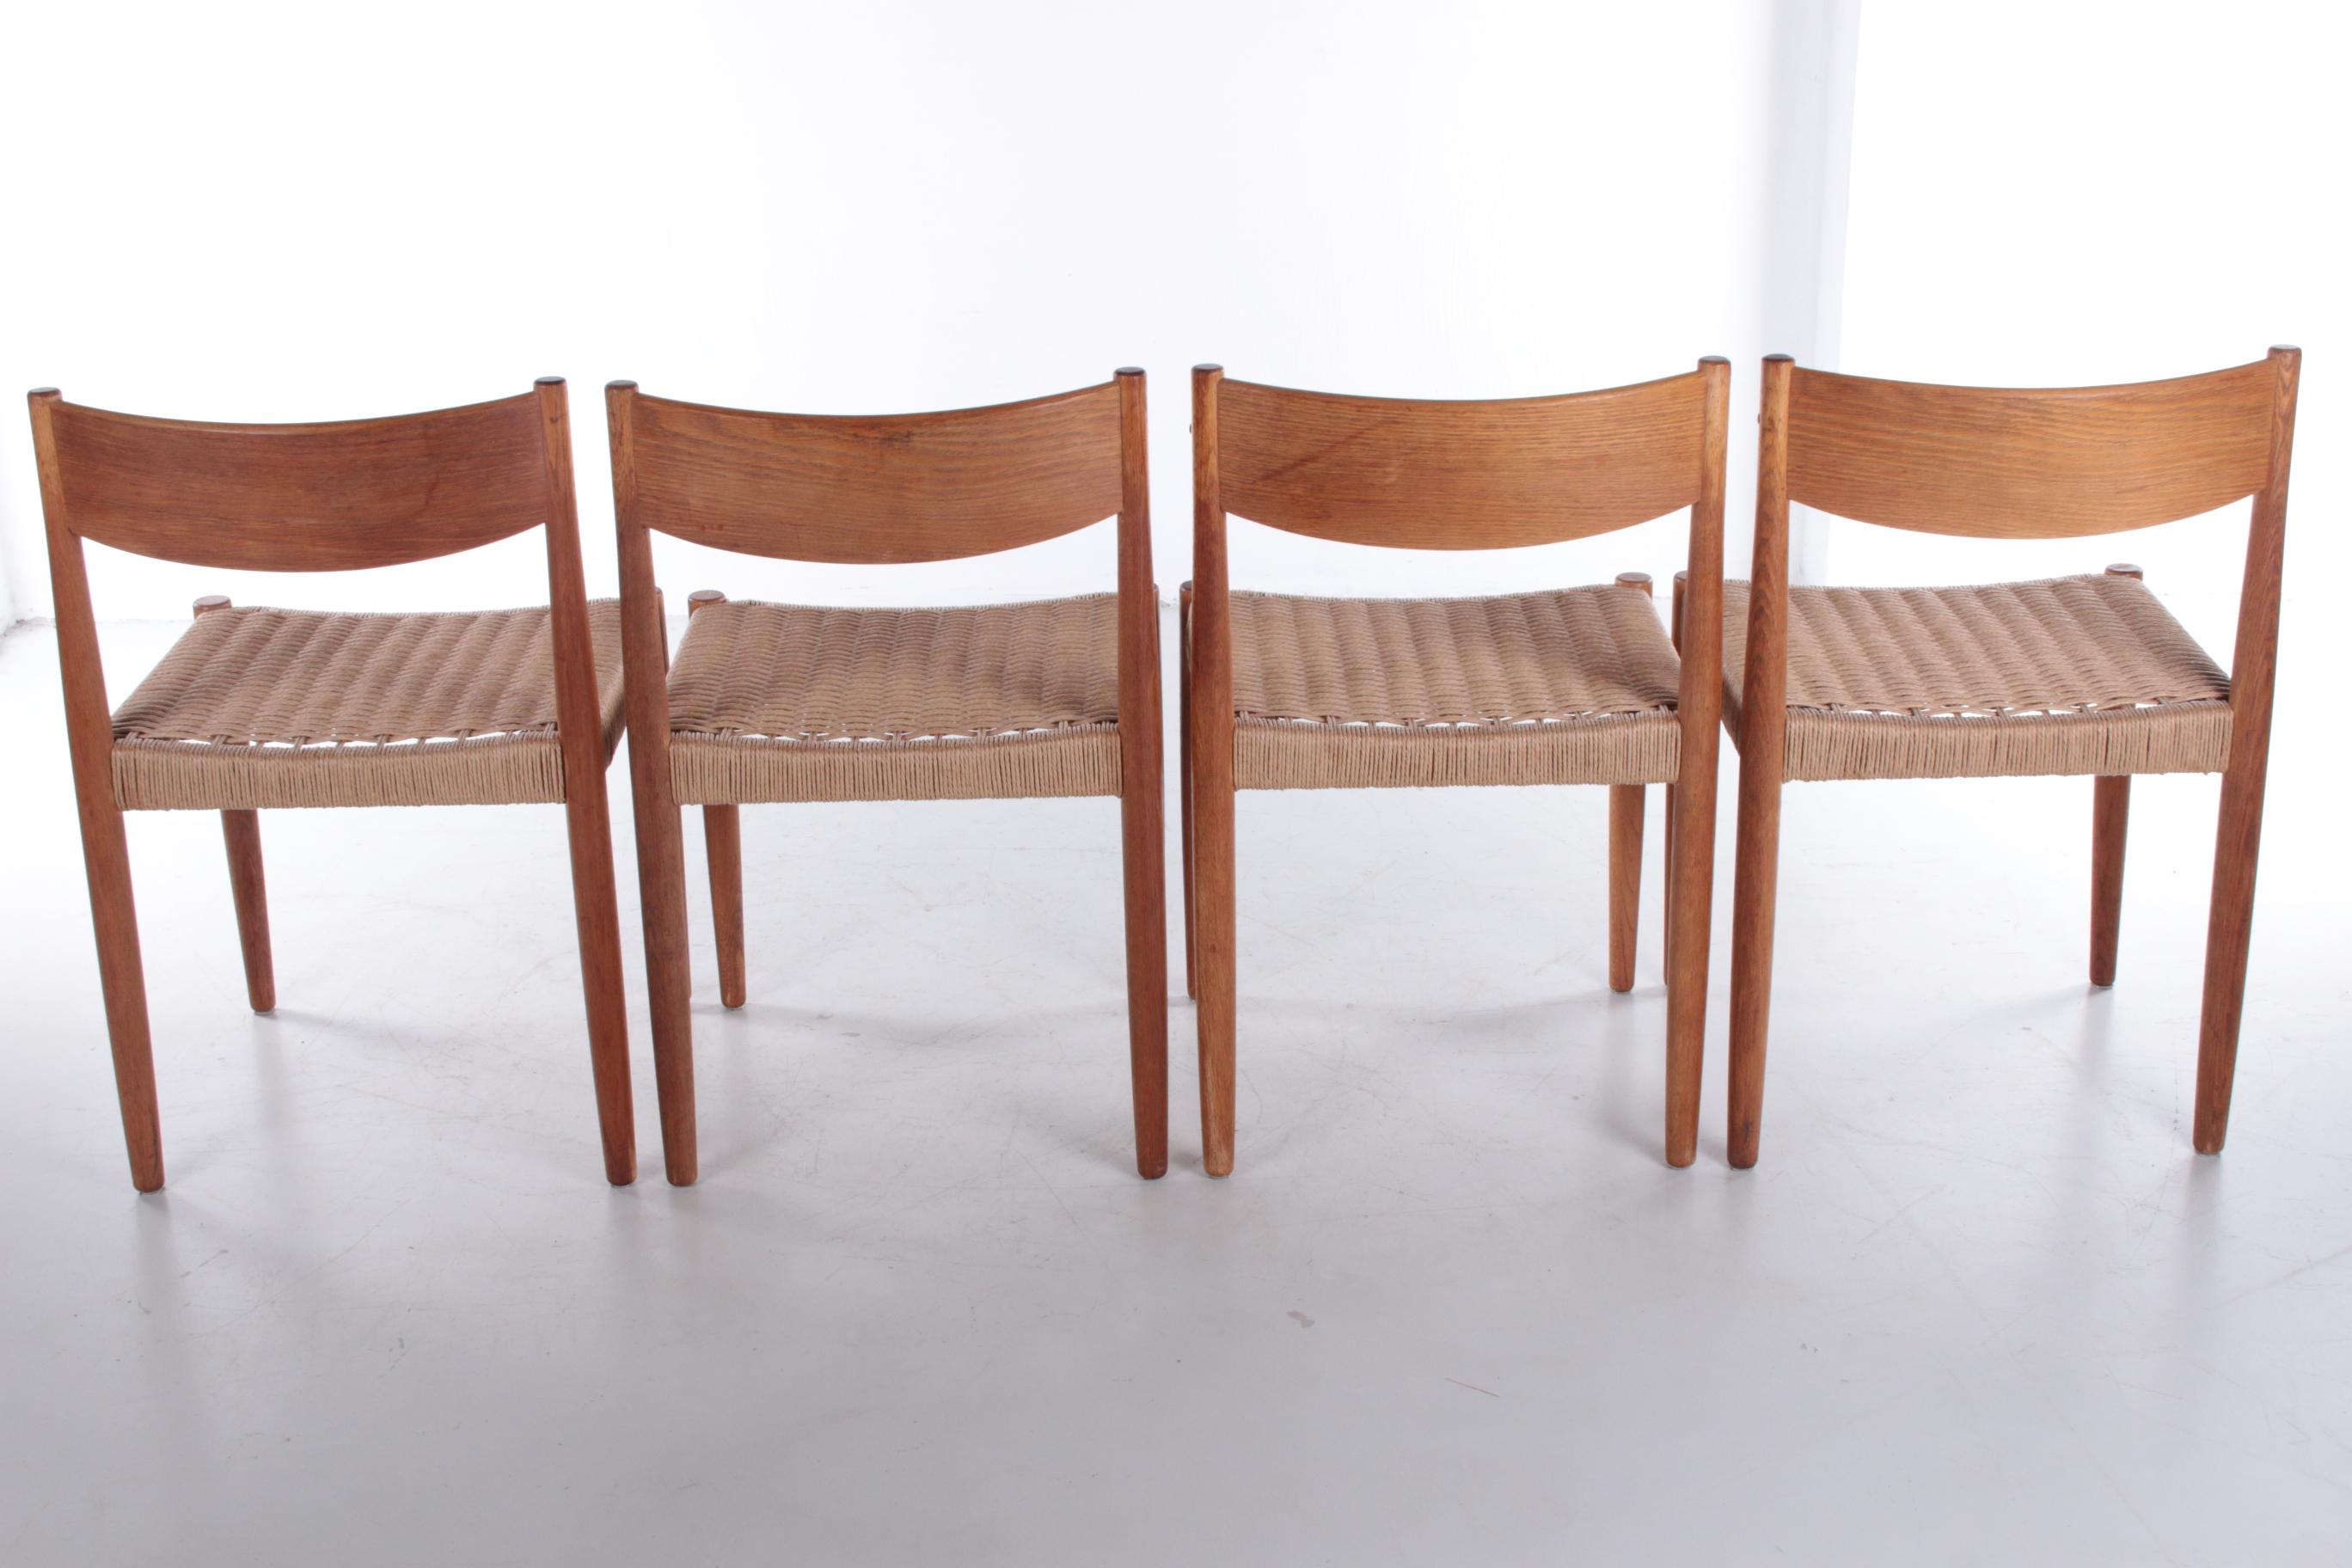 Papercord Set of 4 Dining Room Chairs by Poul Volther for Frem Røjle, 1960s